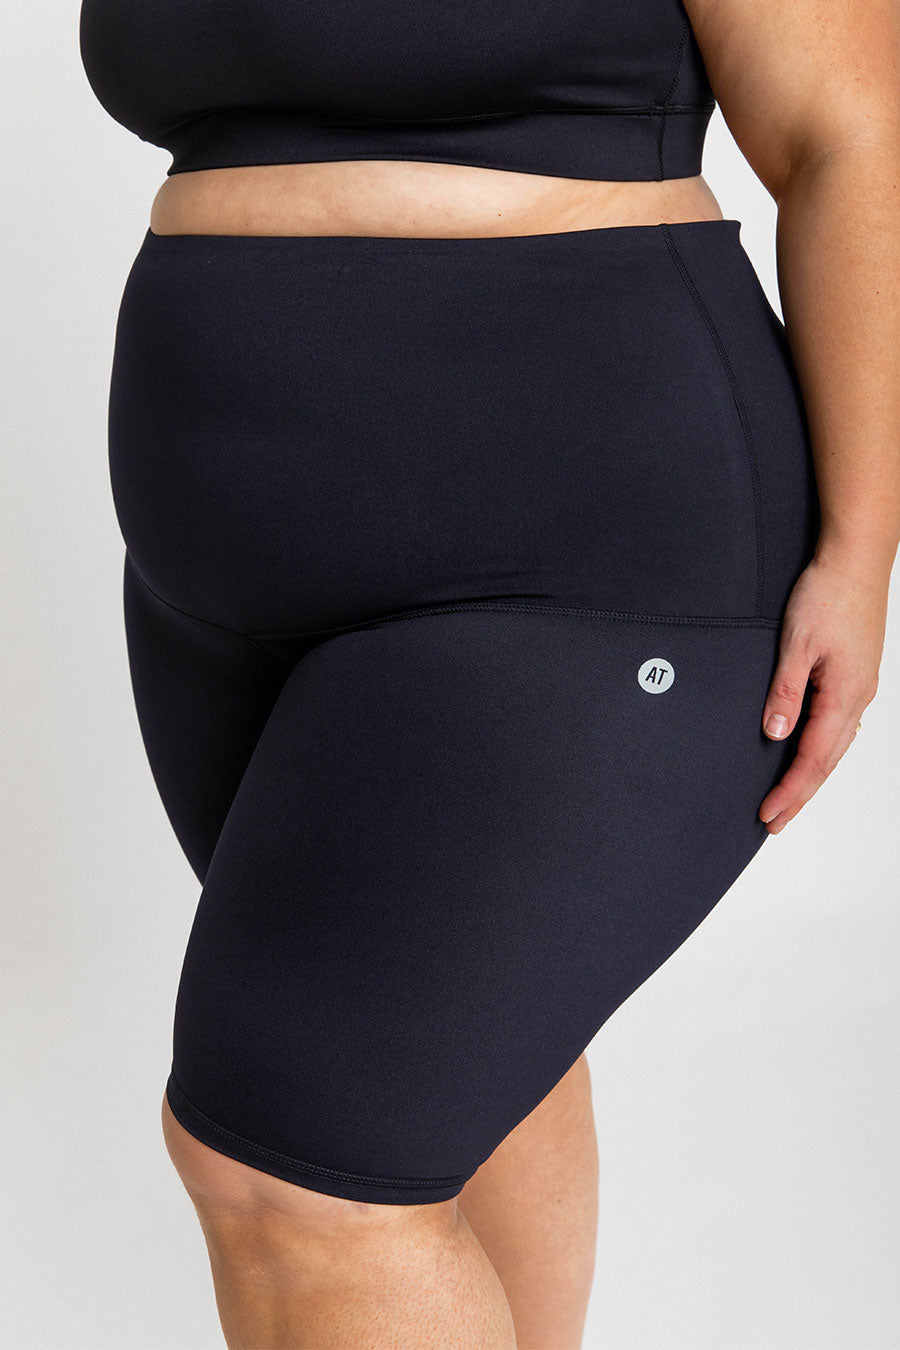 Recovery Support Bike Short - Black from Active Truth™
